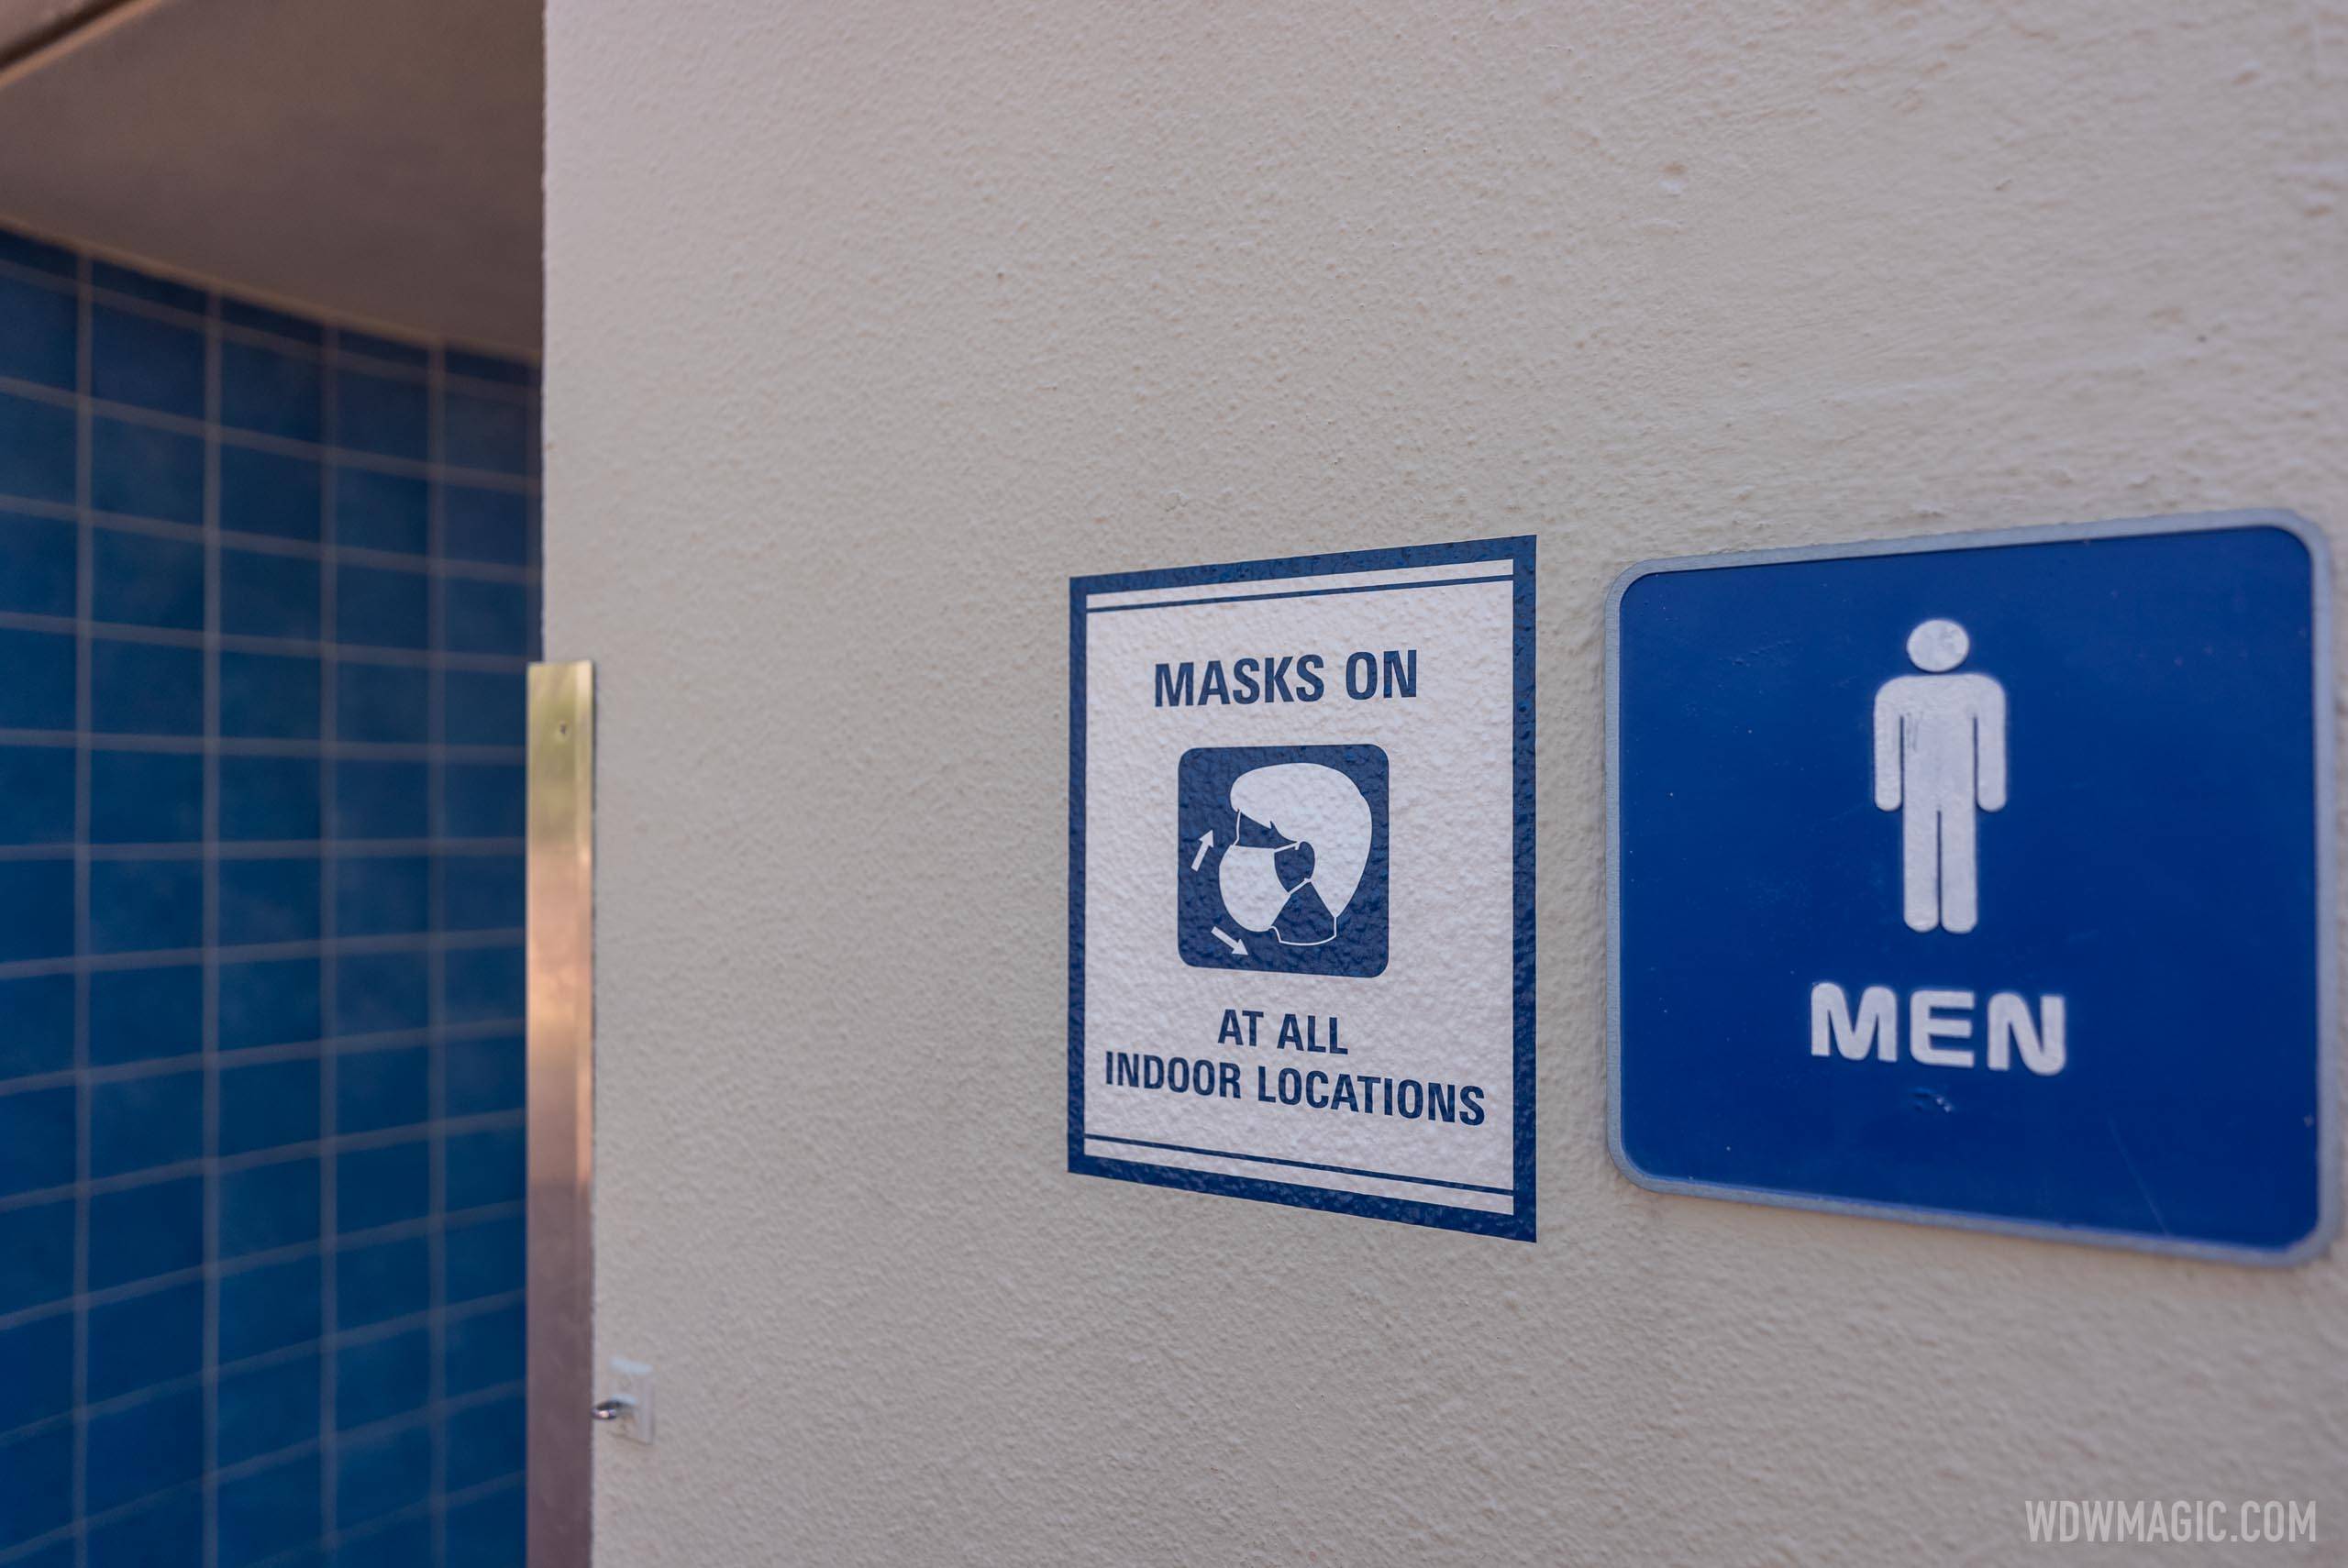 Disney rolls out new 'Masks On' signage at problem areas for indoor mask compliance at Walt Disney World theme parks